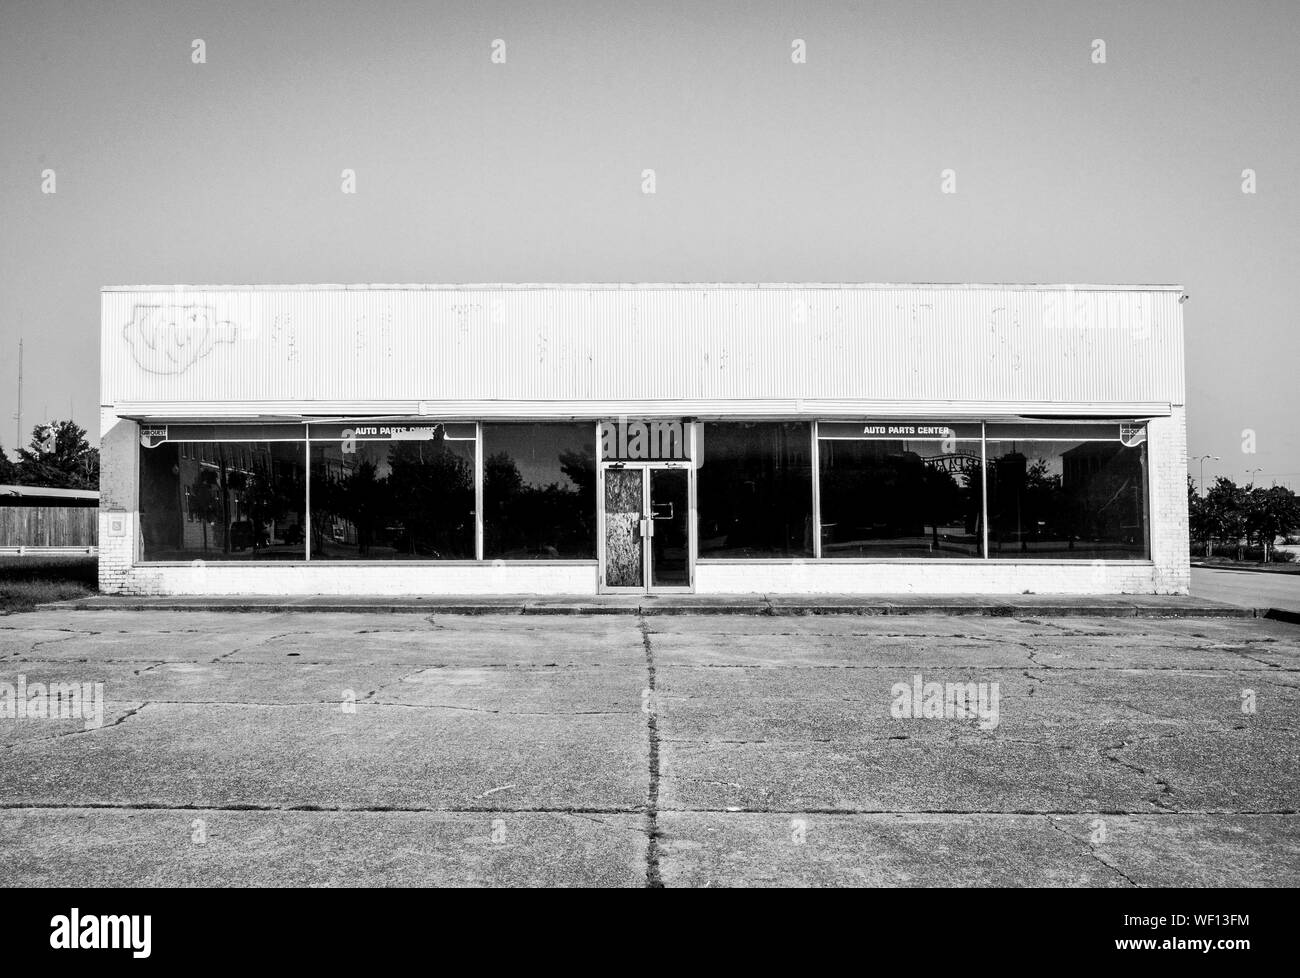 Abandoned old white commercial building in distress, once an Auto Parts center, in an empty parking lot, in an economically depressed area of America Stock Photo